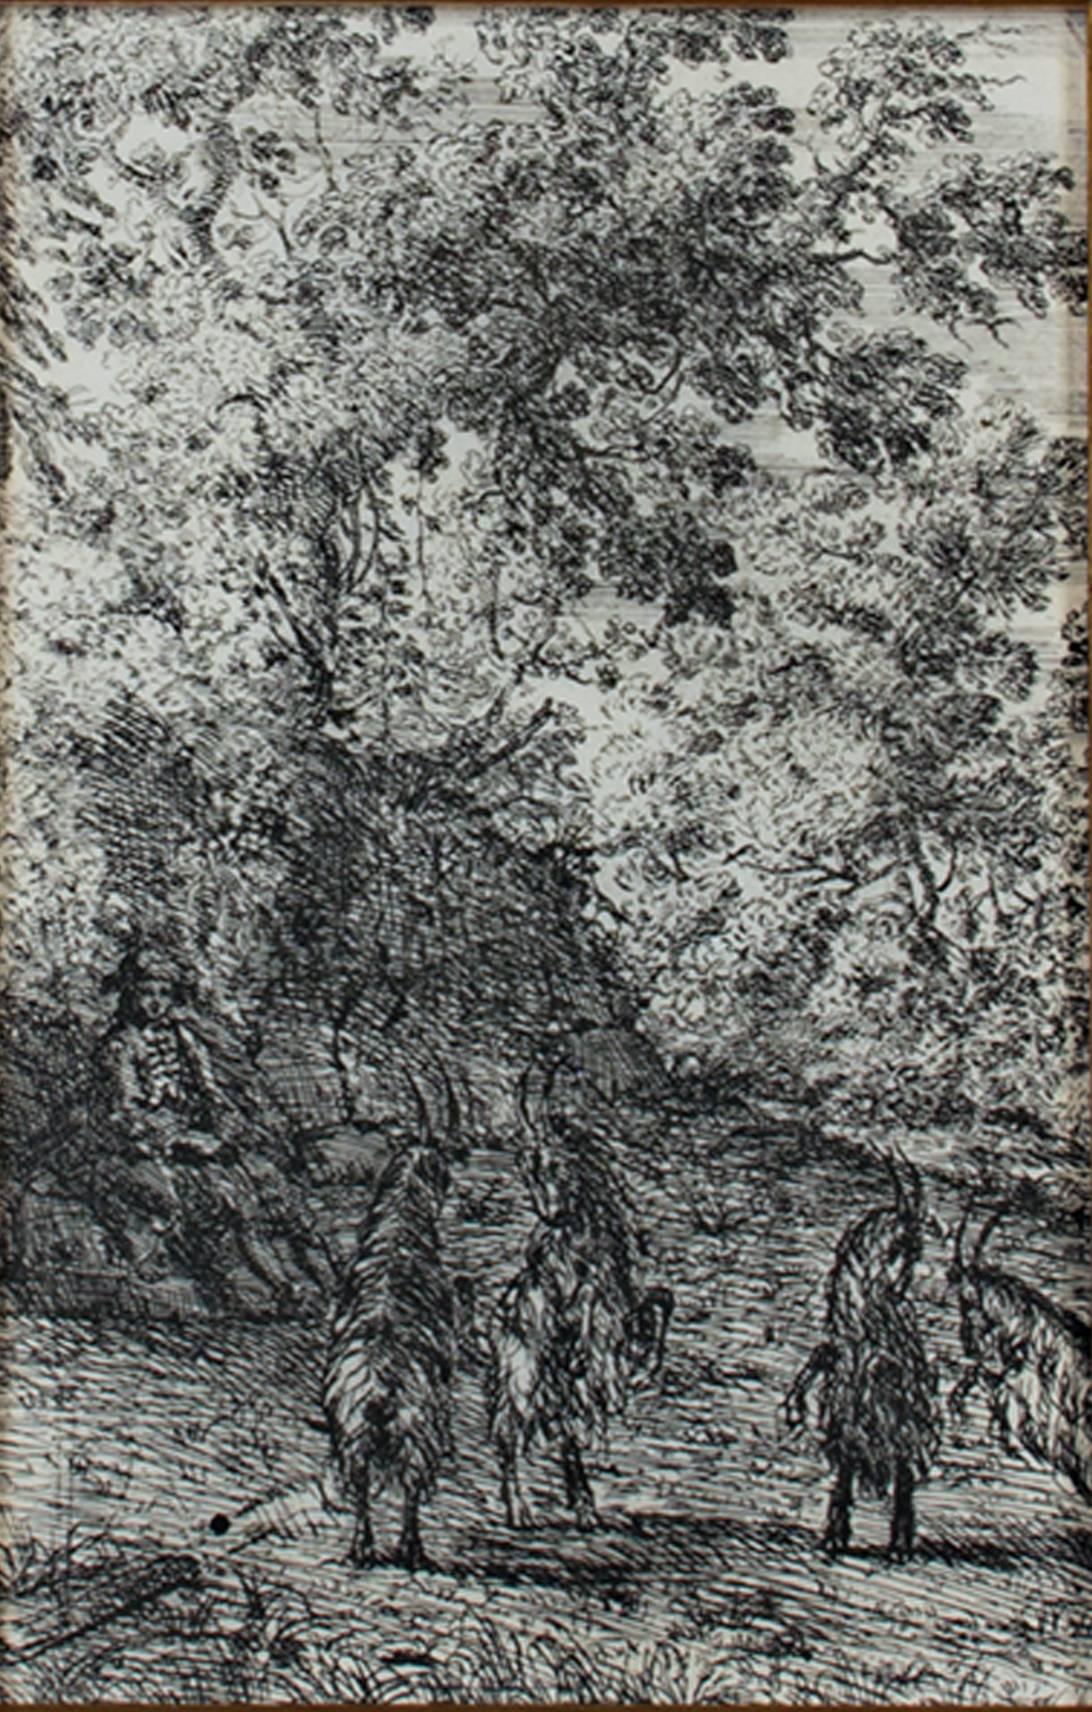 Claude Lorrain Animal Print - 17th century etching black and white landscape scene forest trees goats